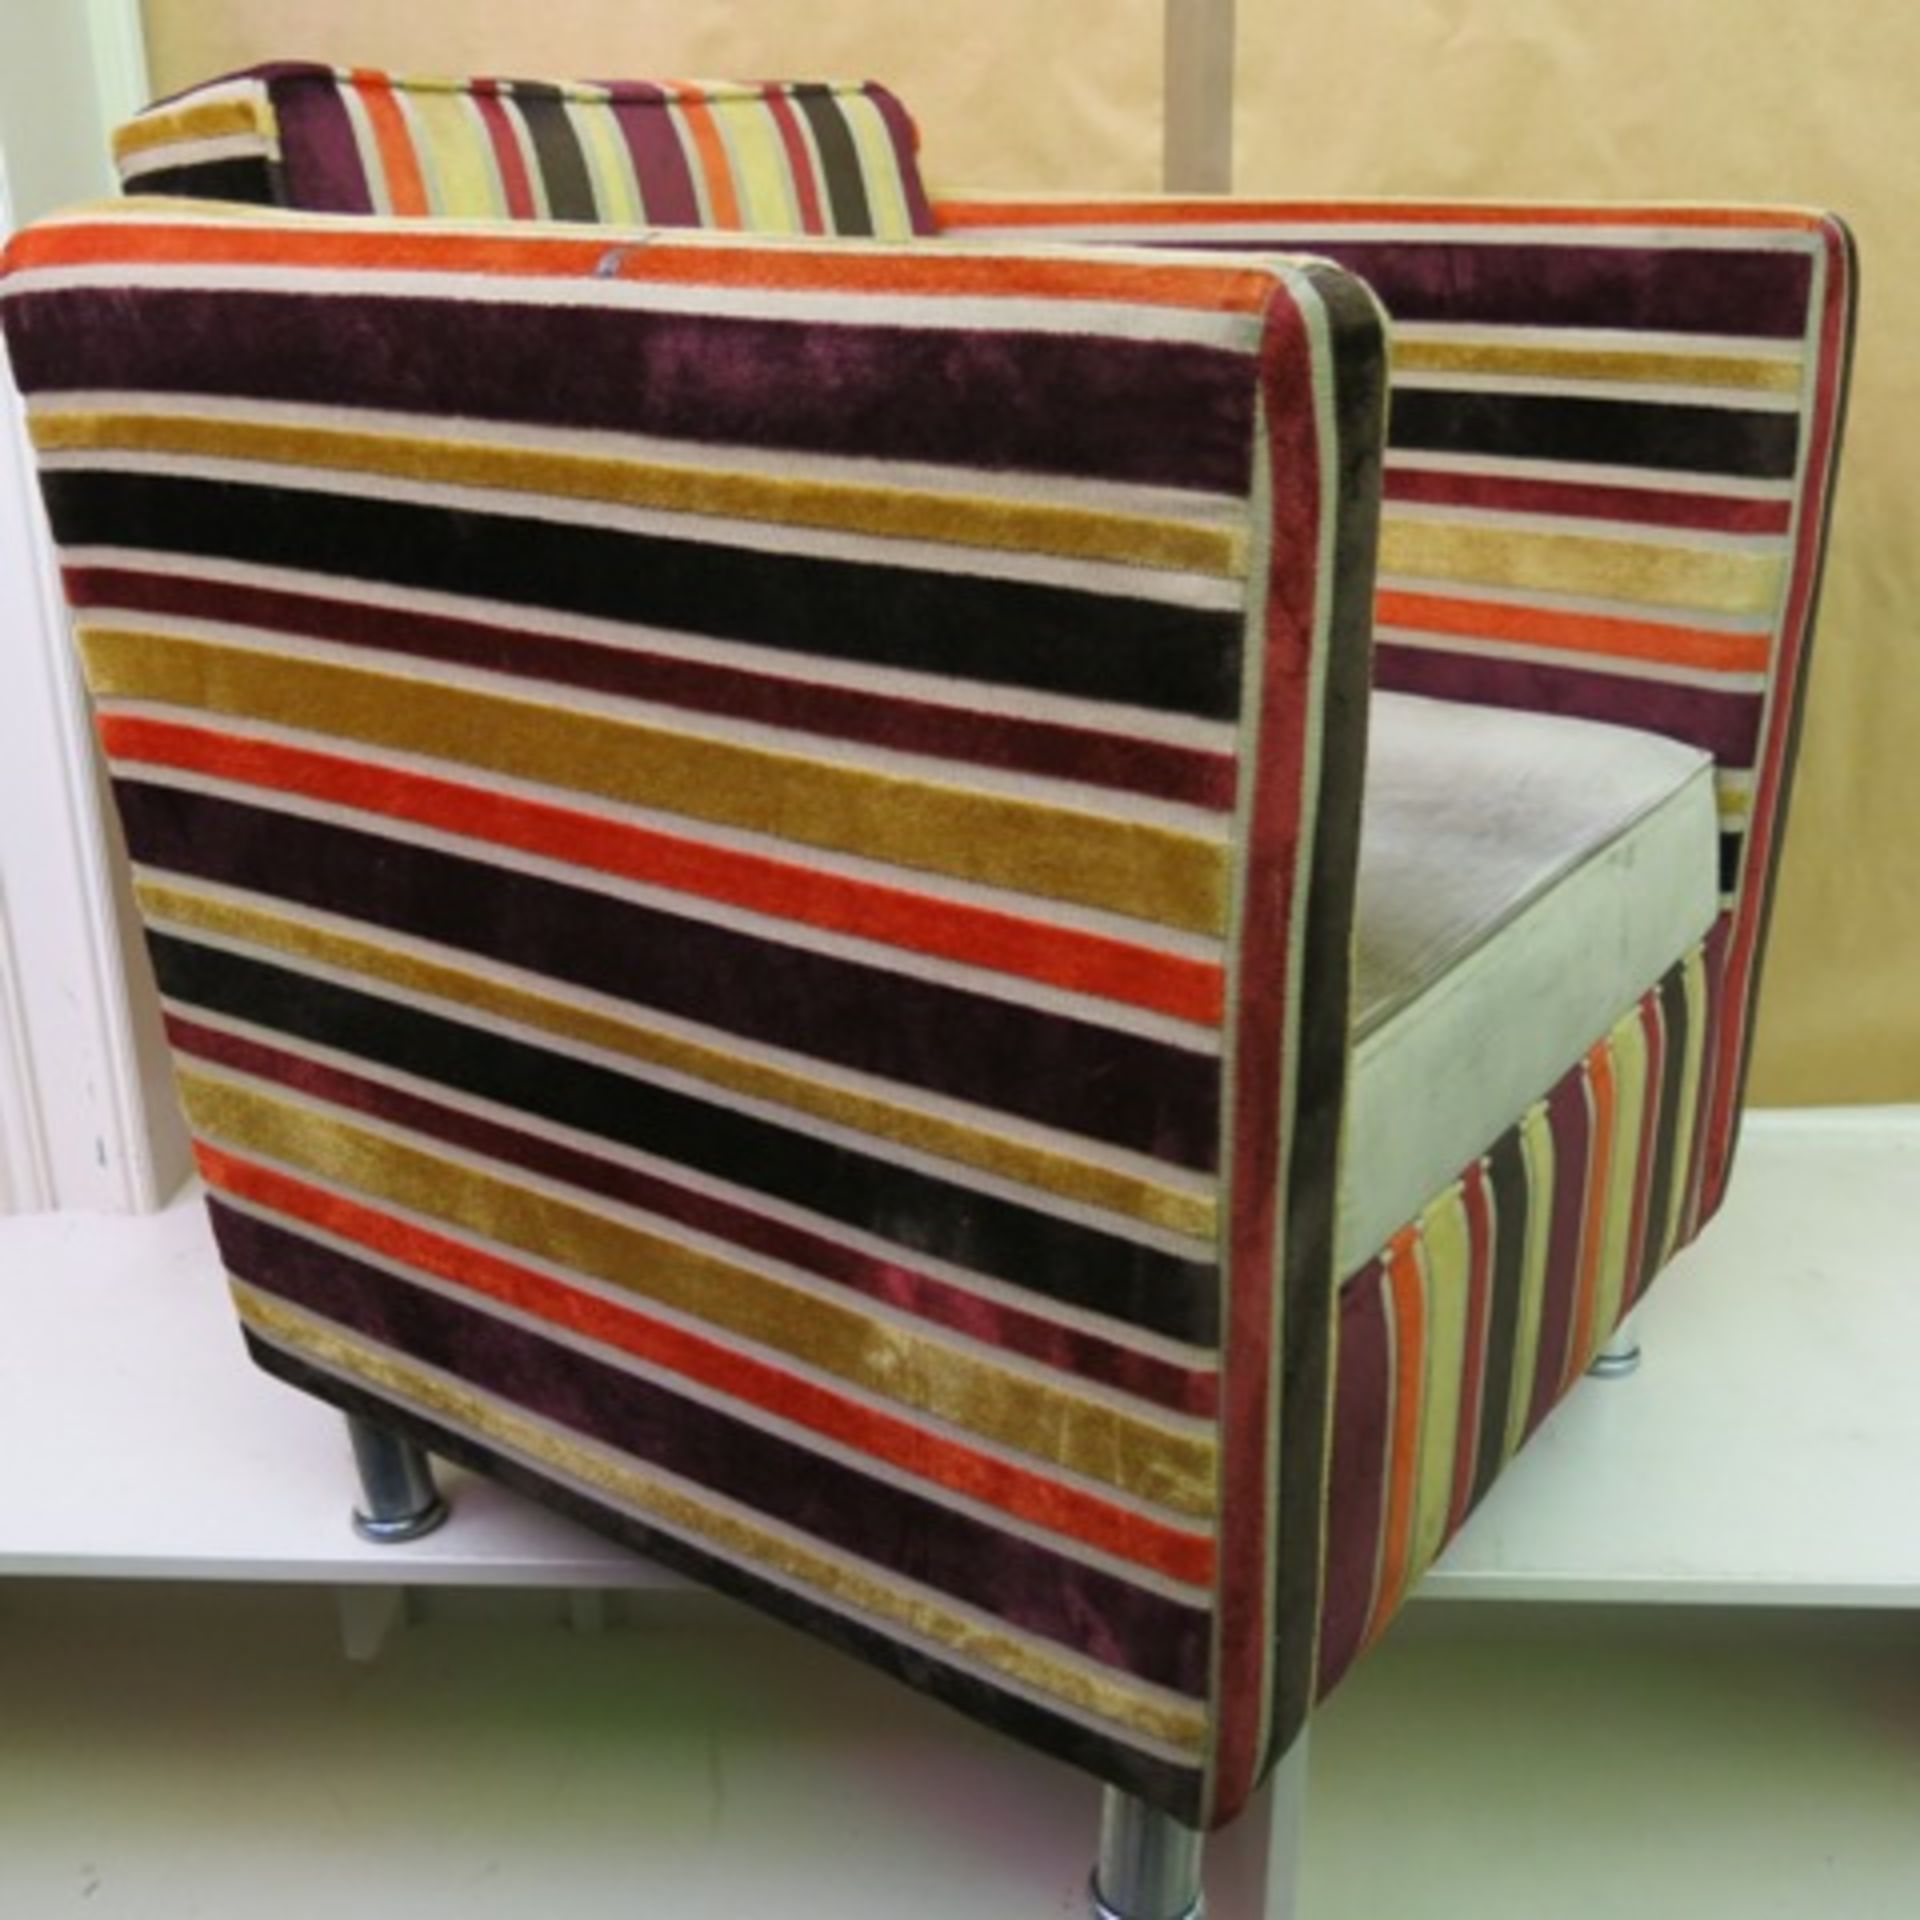 2 x Armchairs Upholstered in Multi-coloured Fabric on Metal Legs - Image 8 of 10